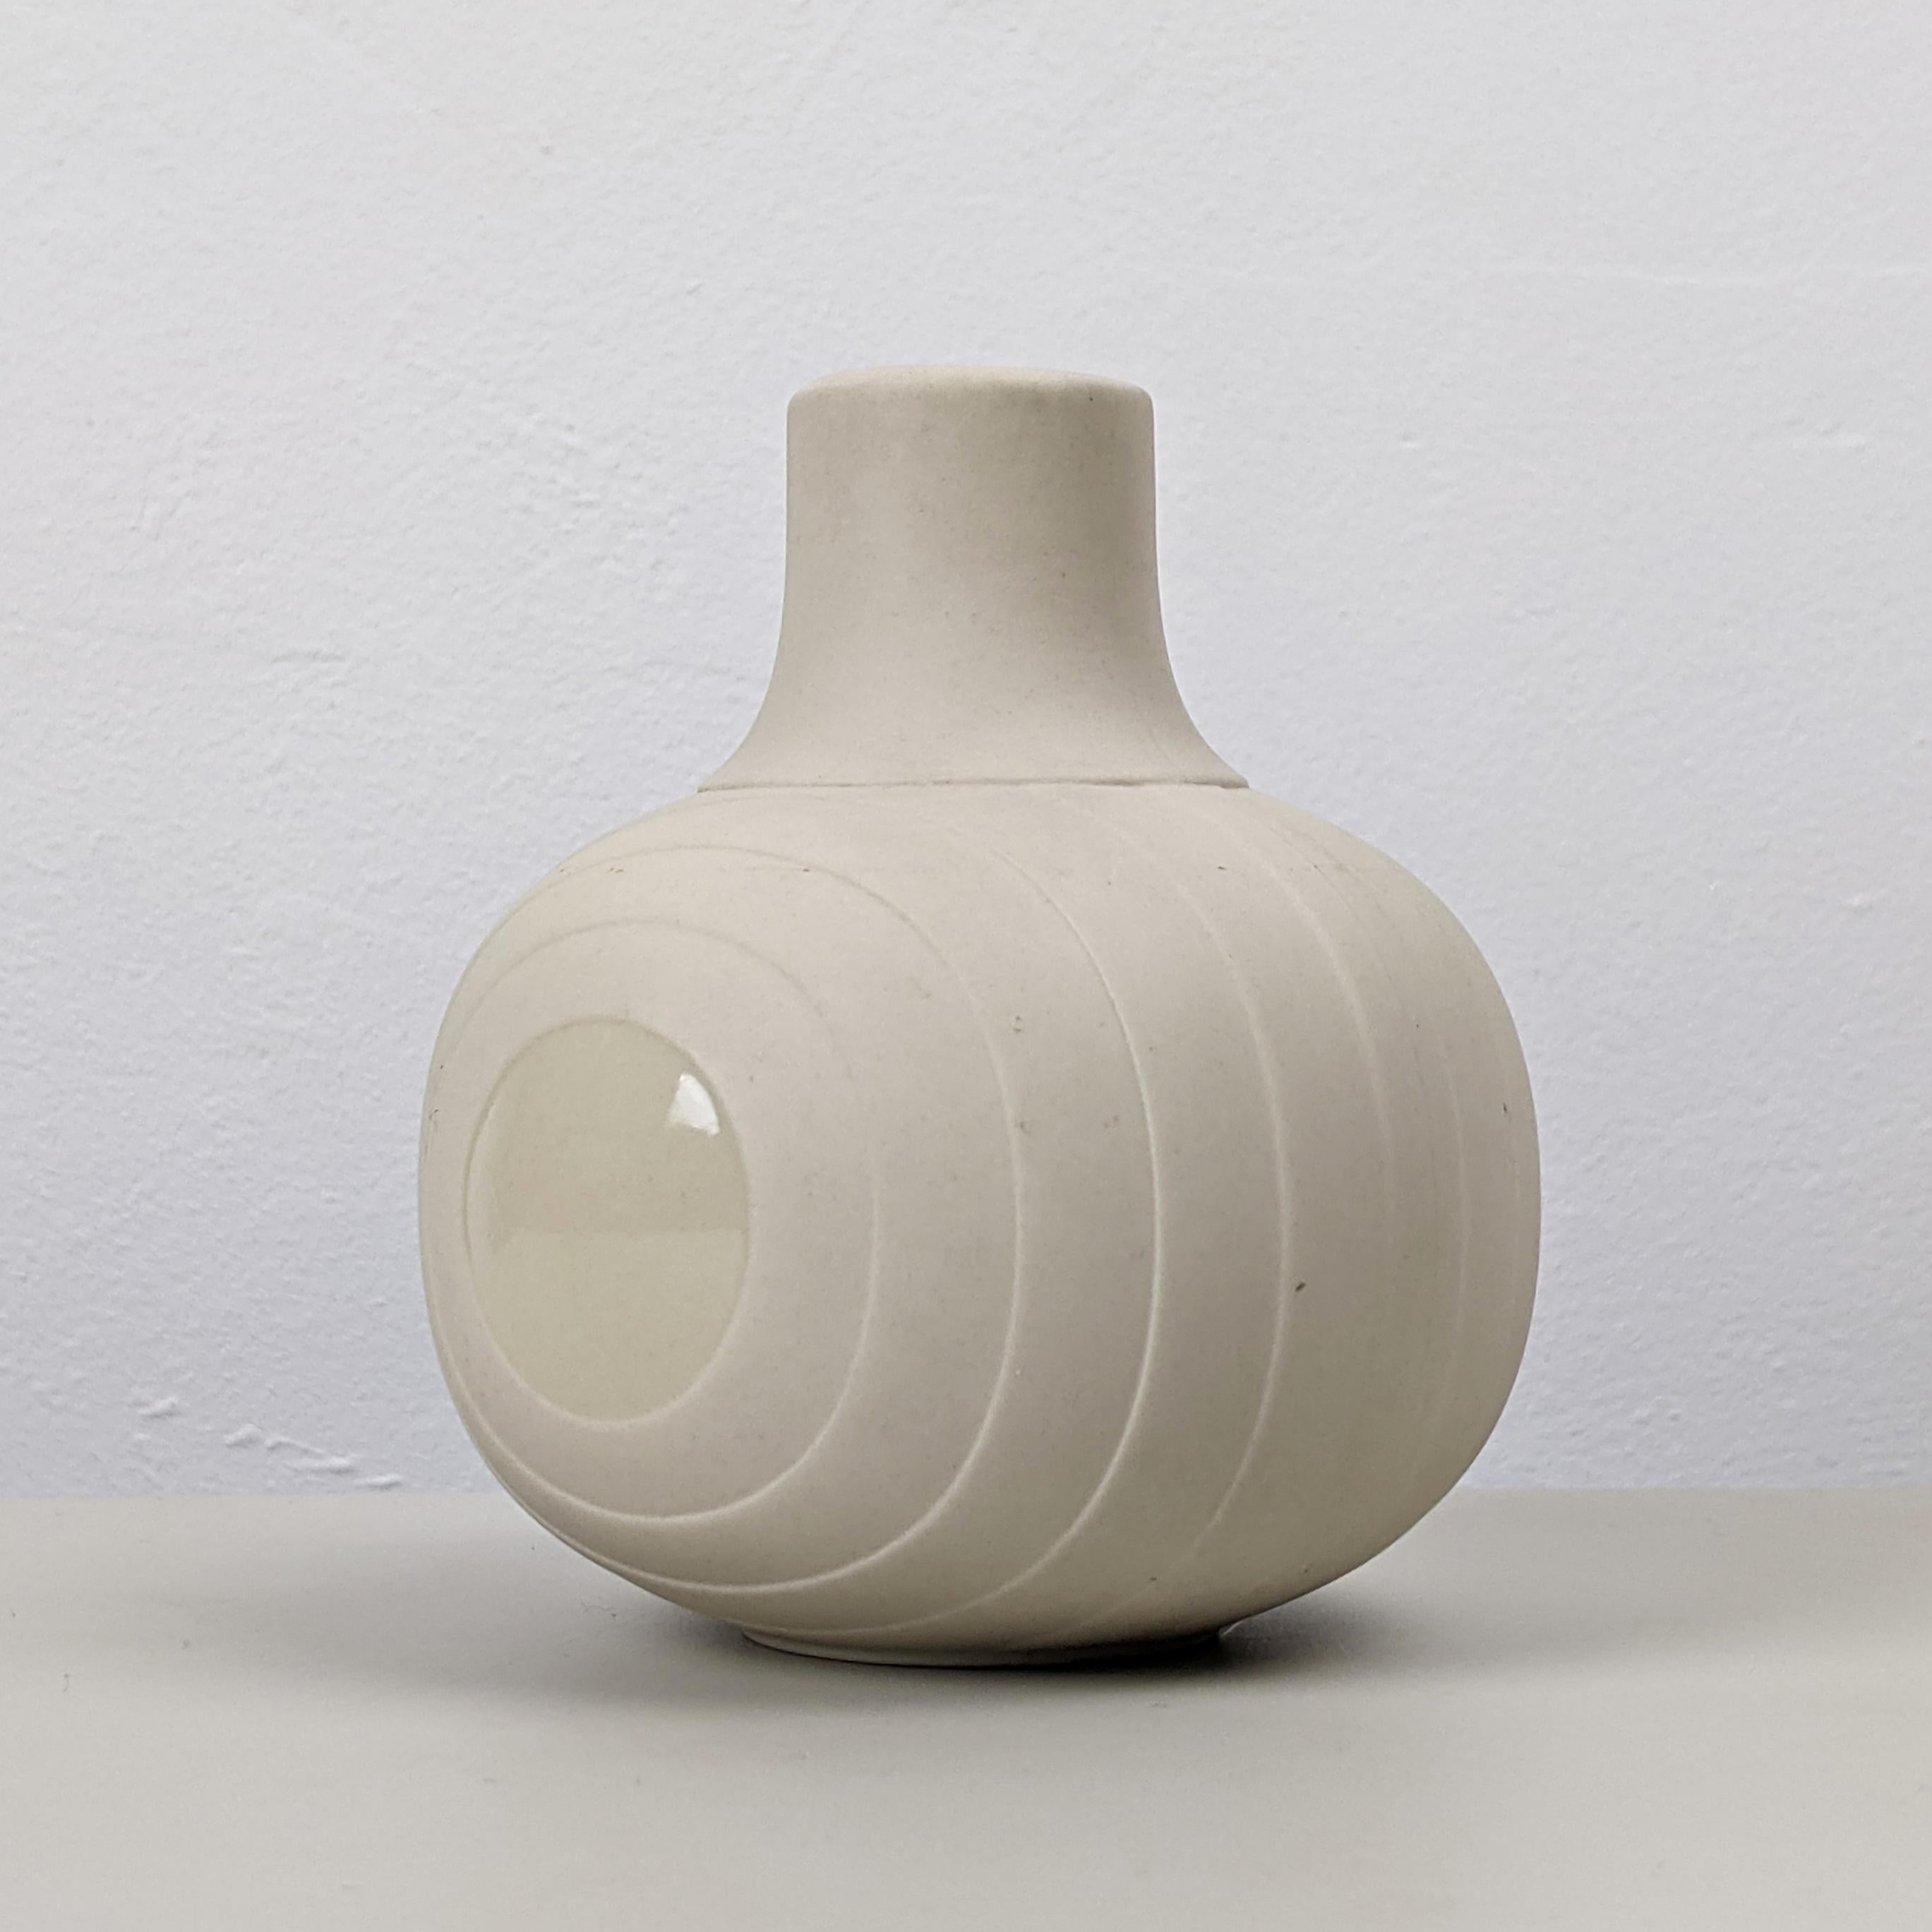 Molded Hornsea Small Vase from the ‘Concept’ Series, Designed 1977 by Martin Hunt